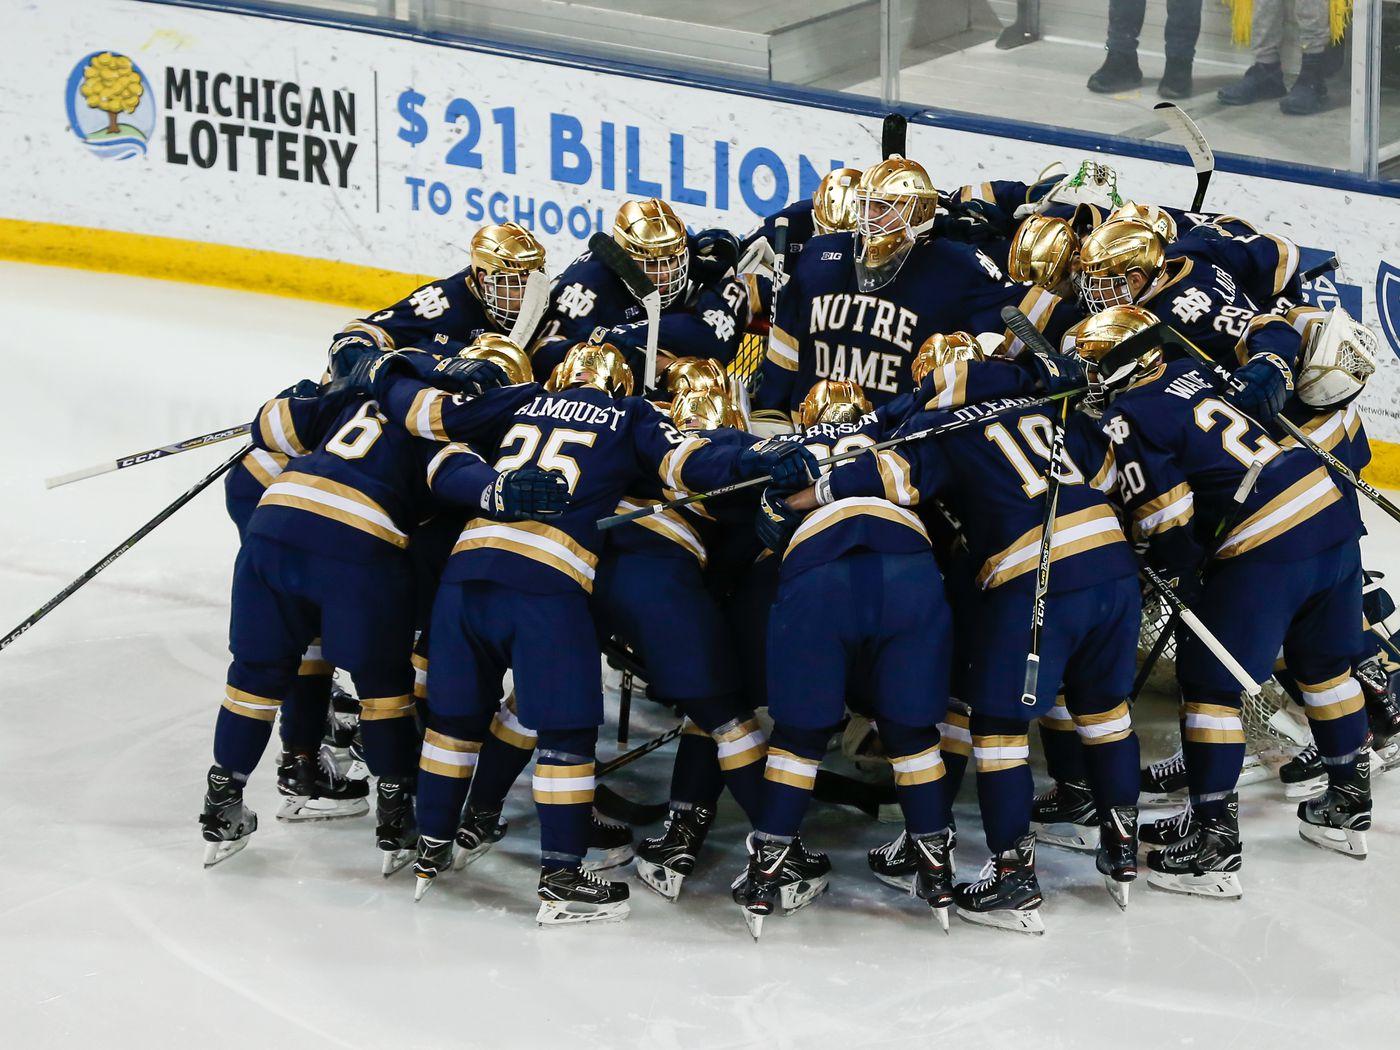 Notre Dame Hockey: B1G Timers Foot Down